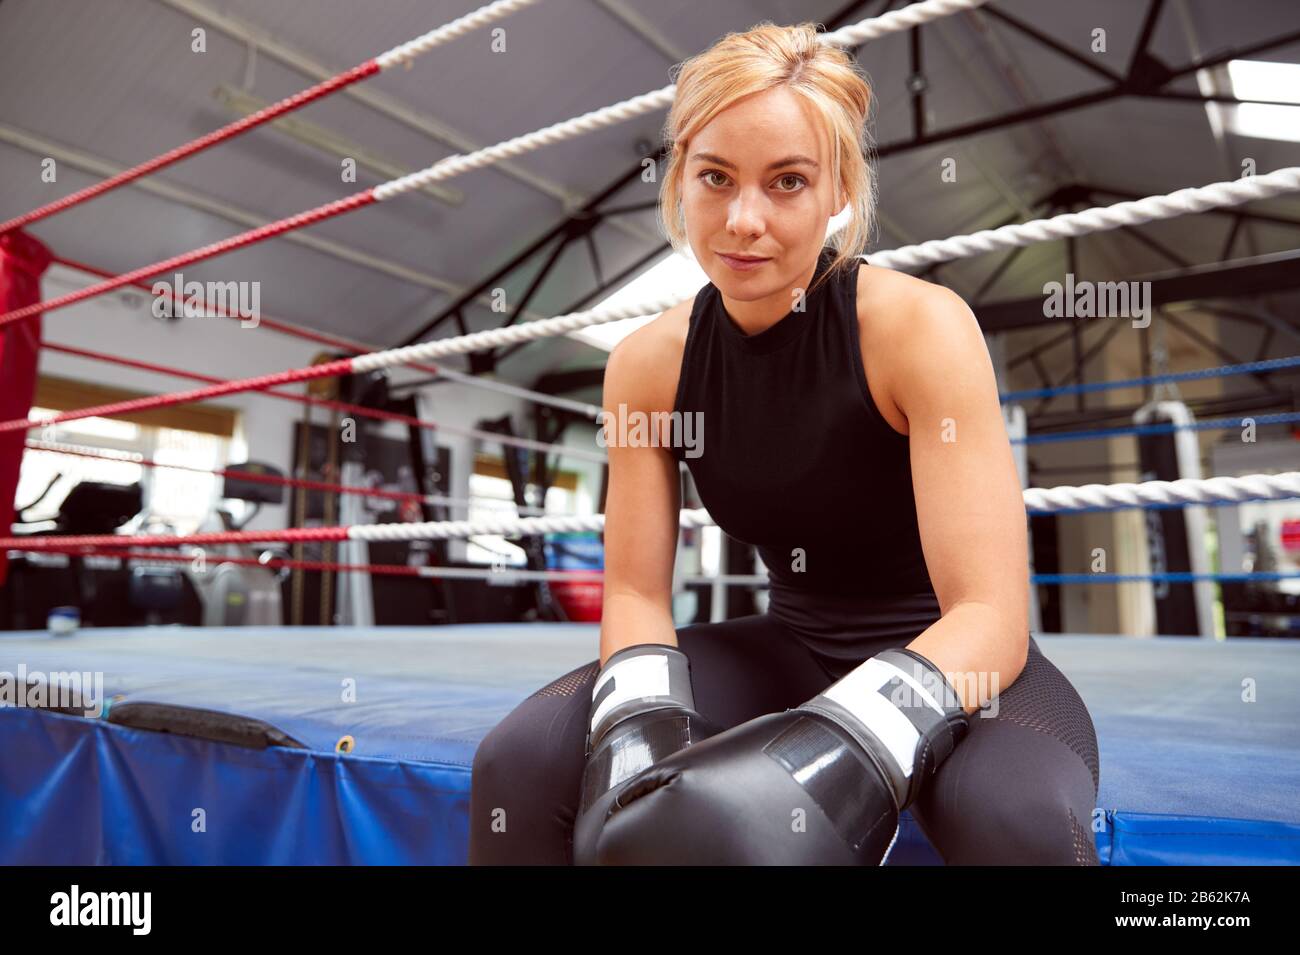 Portrait Of Female Boxer With Gum Shield In Gym Wearing Boxing Gloves Sitting On Boxing Ring Stock Photo